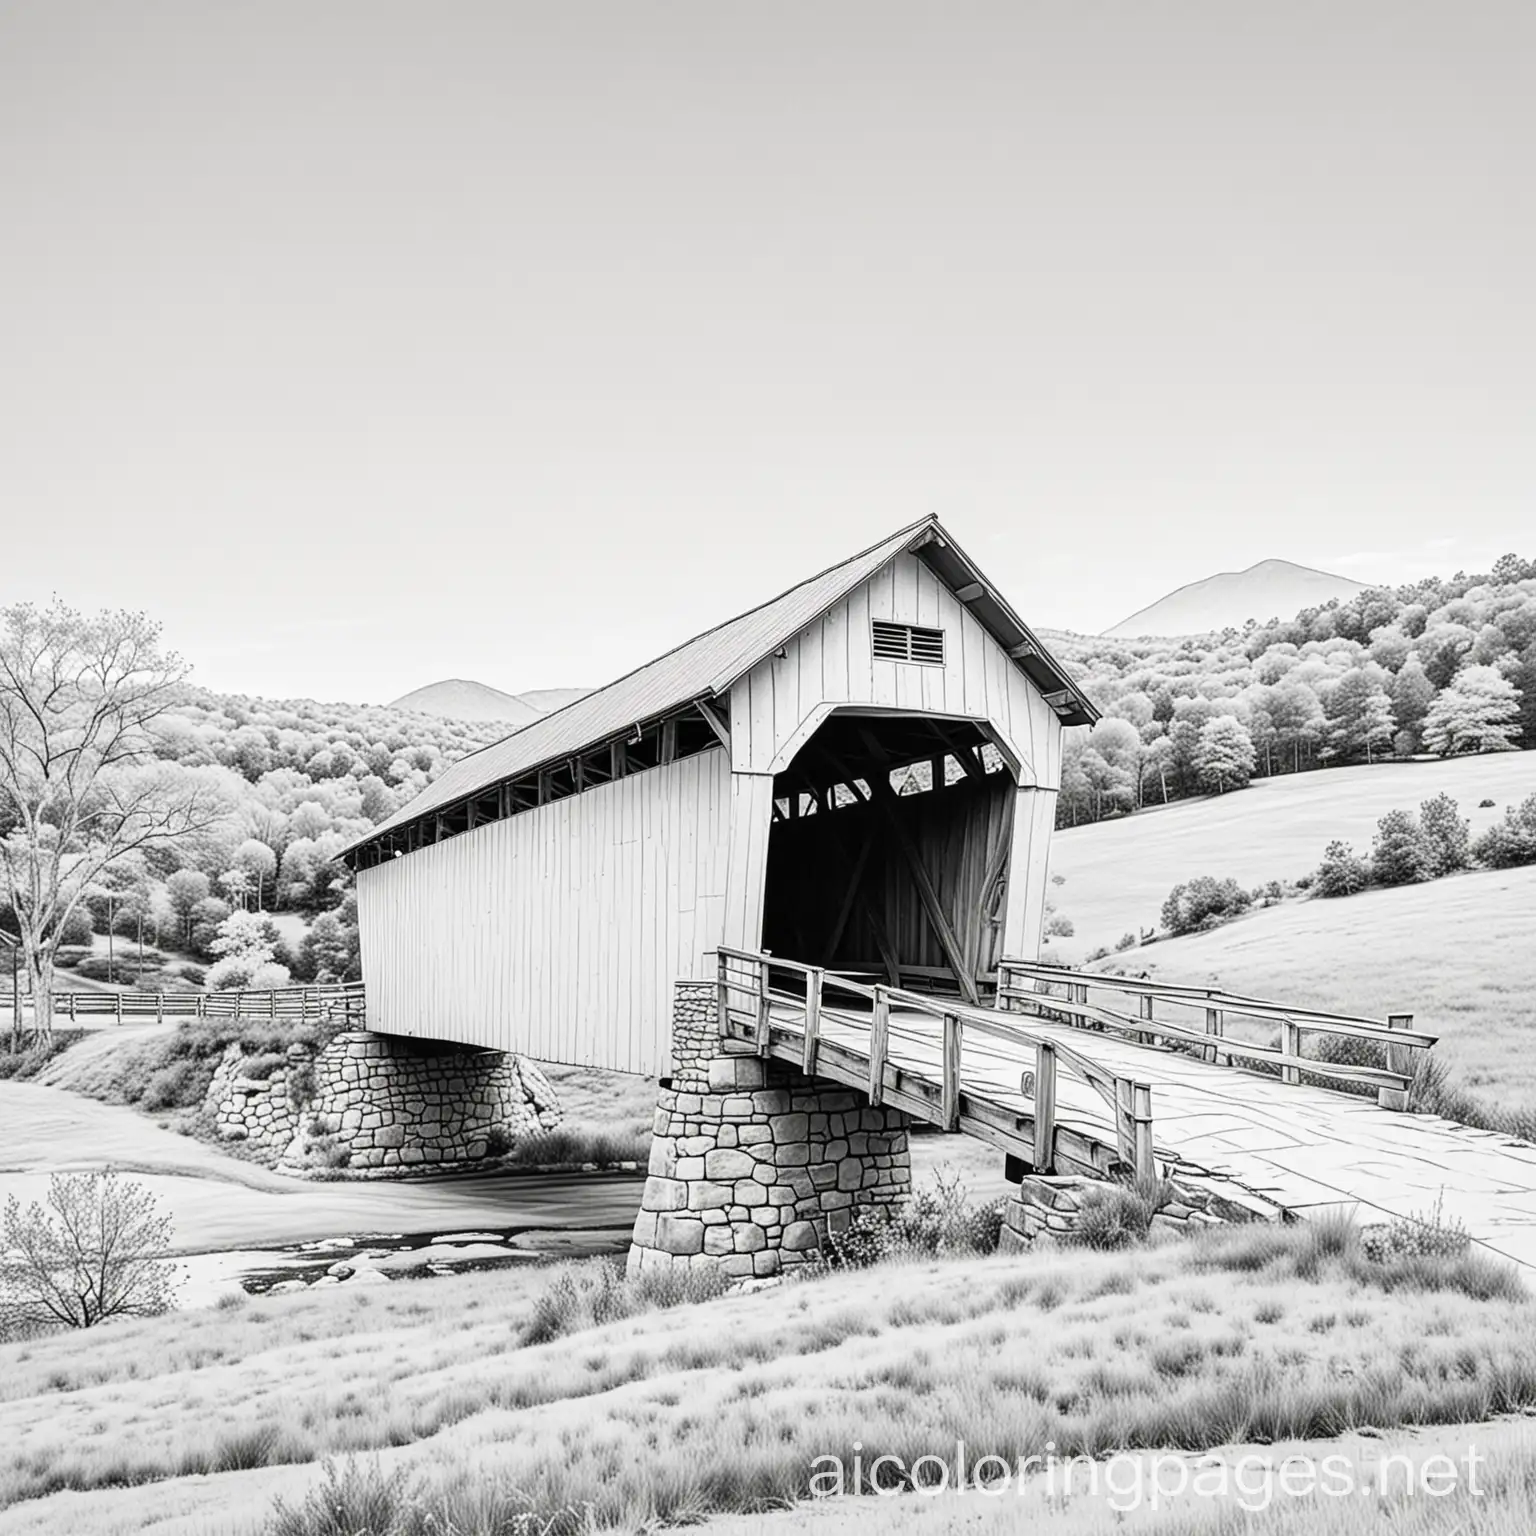 a covered bridge black and white coloring book page. simple clean lines. with rolling hills behind it., Coloring Page, black and white, line art, white background, Simplicity, Ample White Space. The background of the coloring page is plain white to make it easy for young children to color within the lines. The outlines of all the subjects are easy to distinguish, making it simple for kids to color without too much difficulty